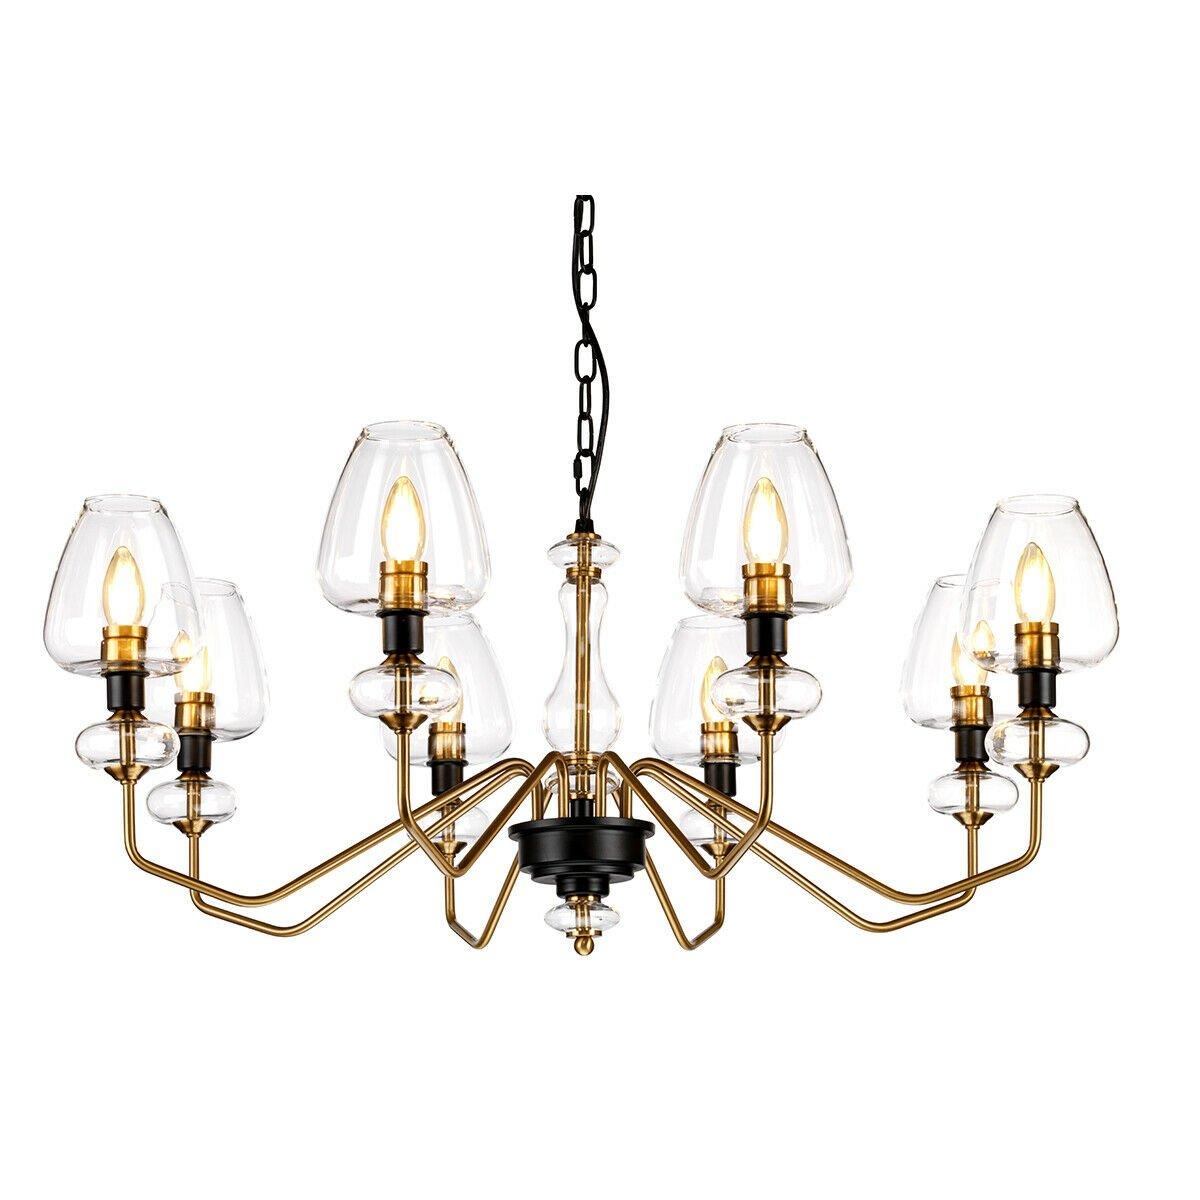 8 Bulb Chandelier Aged Brass Finish Plated And Charcoal Black Paint LED E14 40W